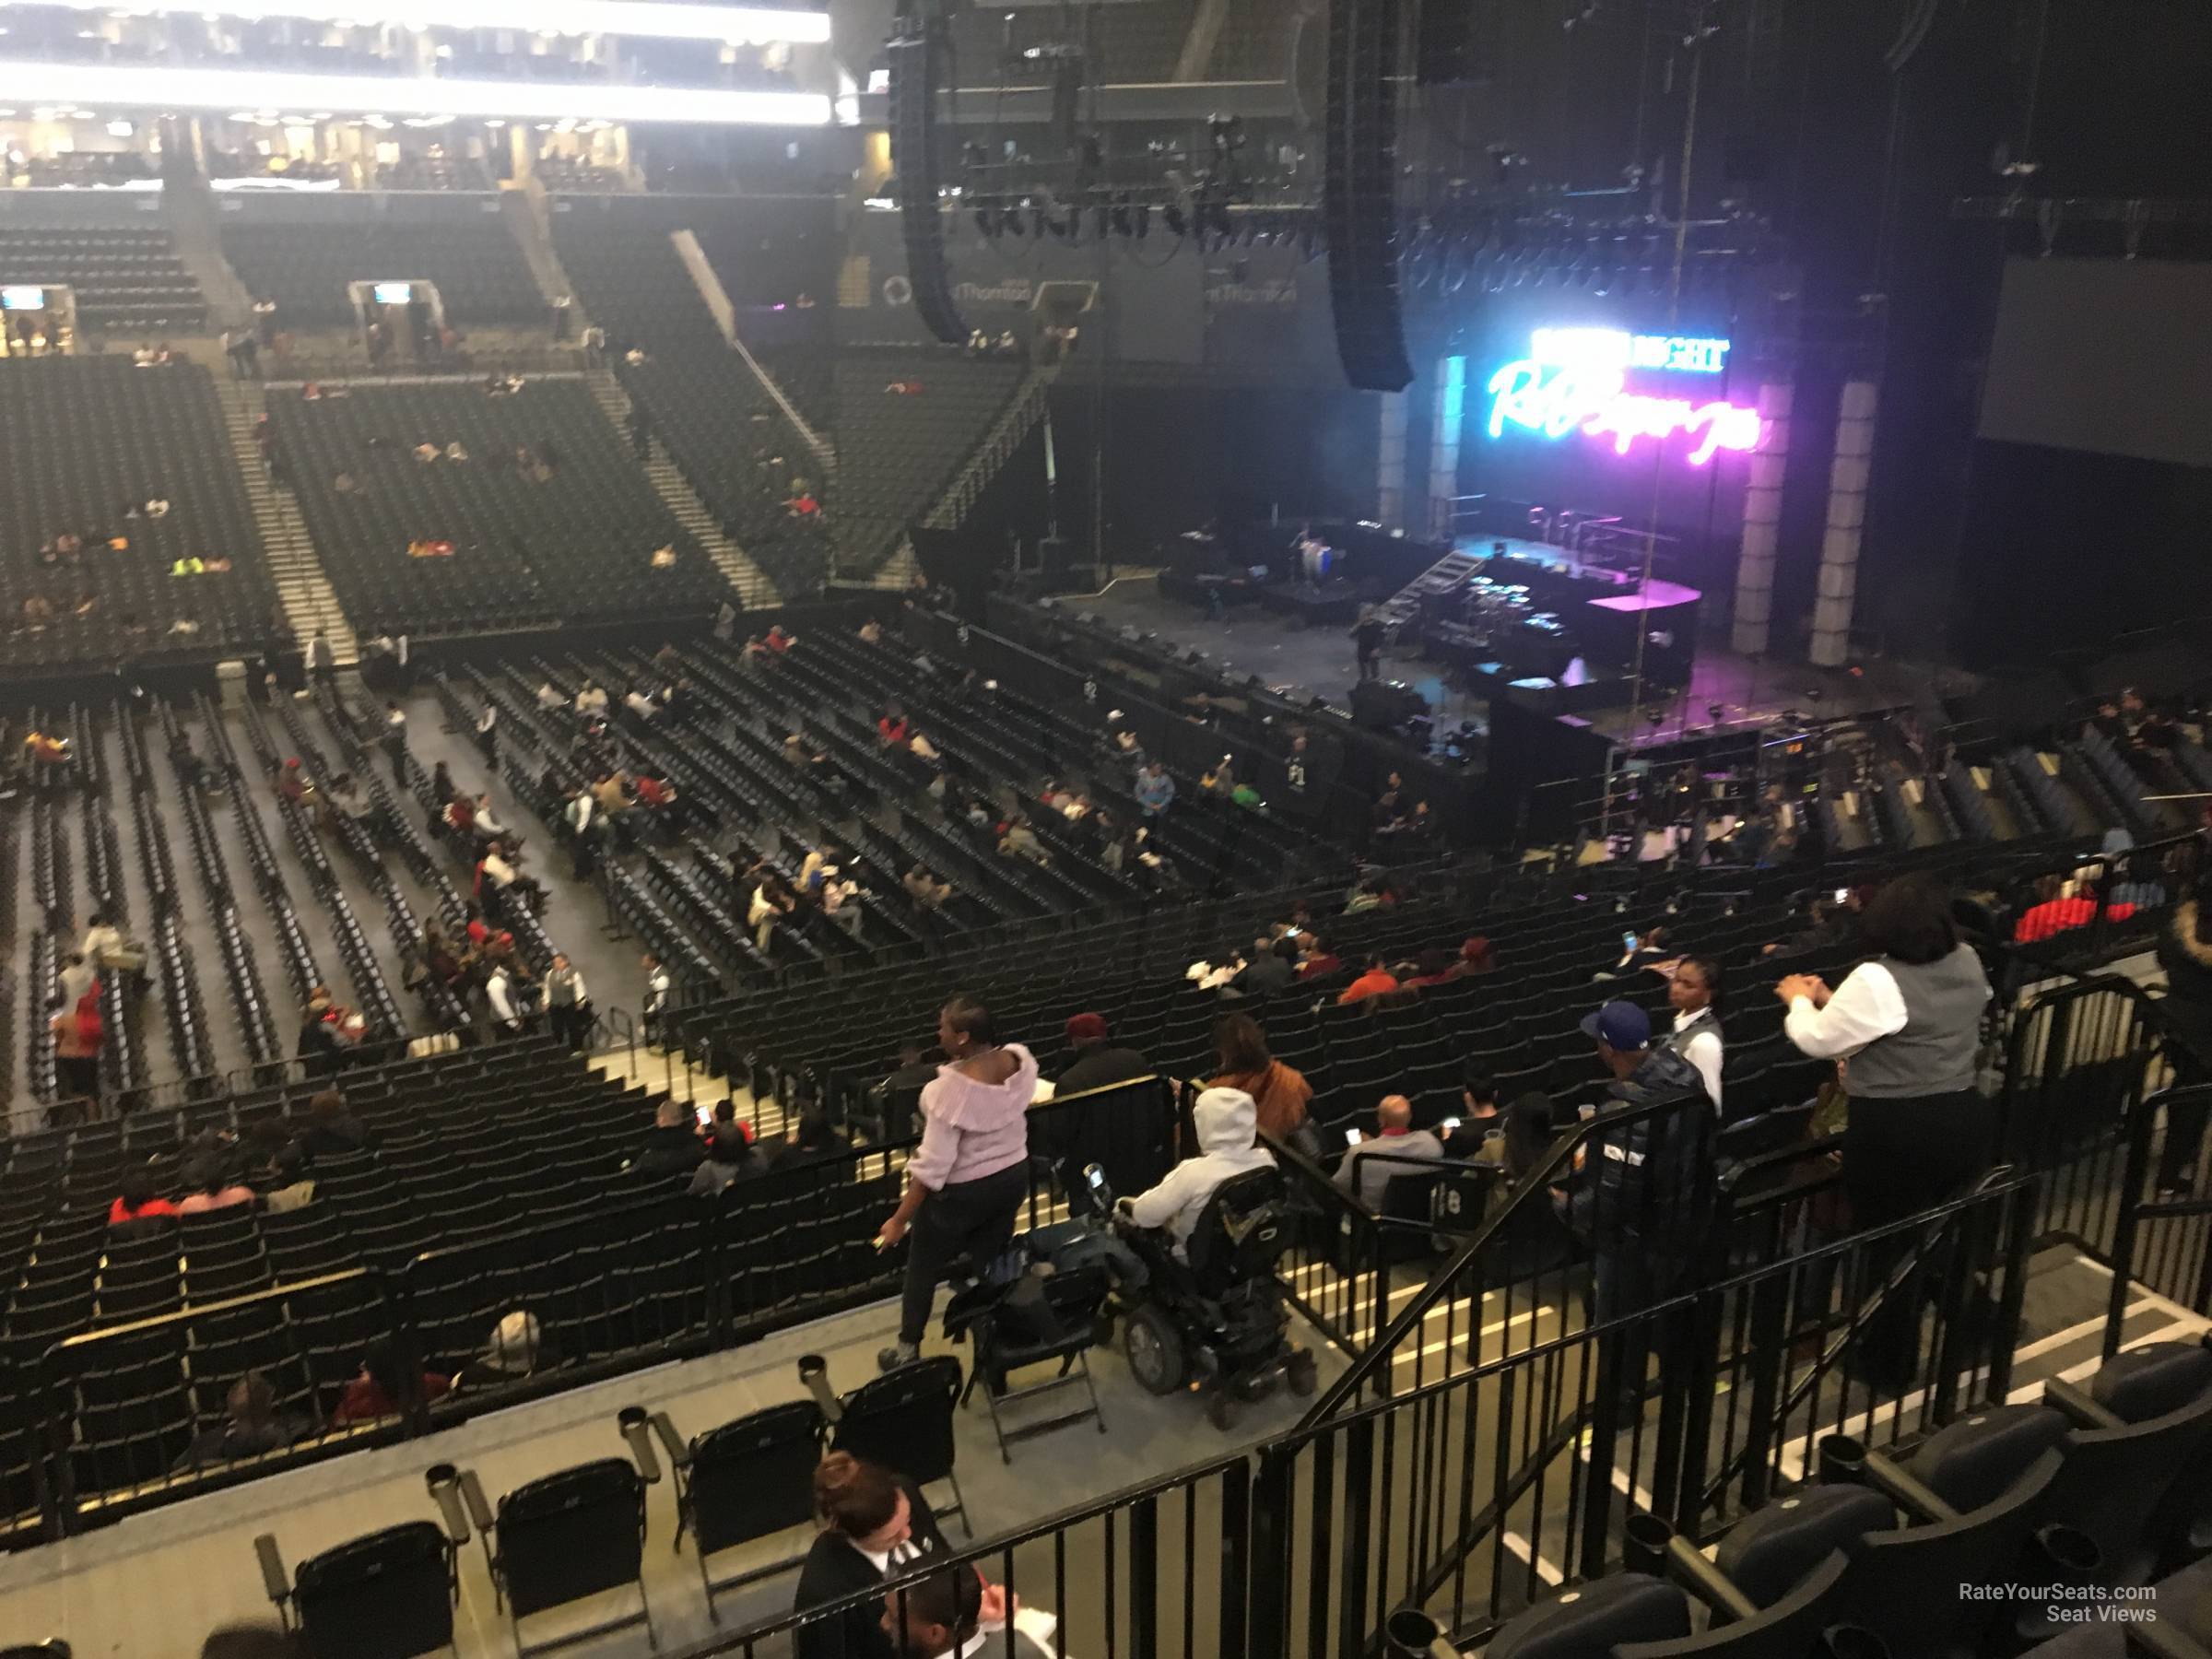 Section 108 at Barclays Center - RateYourSeats.com